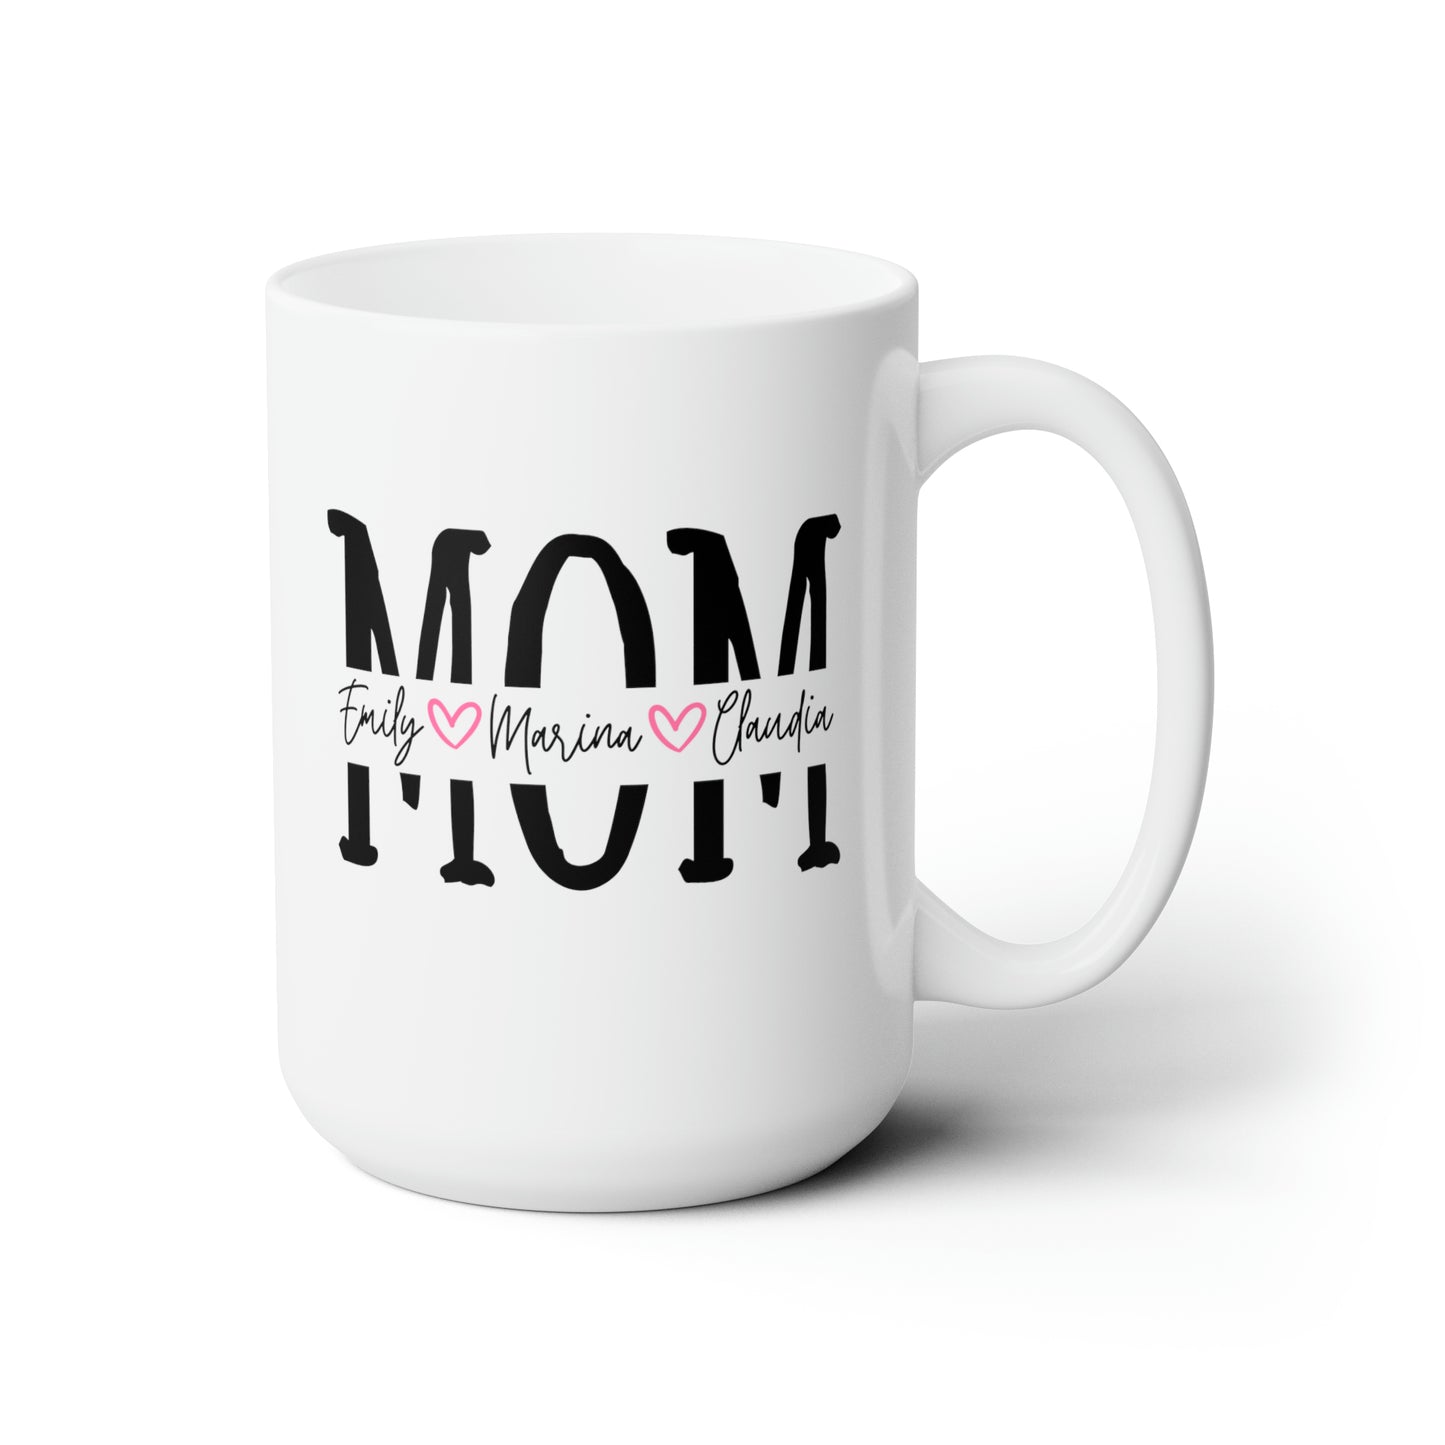 Mom With Kids' Names 15oz white funny large coffee mug gift for mother's day son daughter heart personalize custom waveywares wavey wares wavywares wavy wares